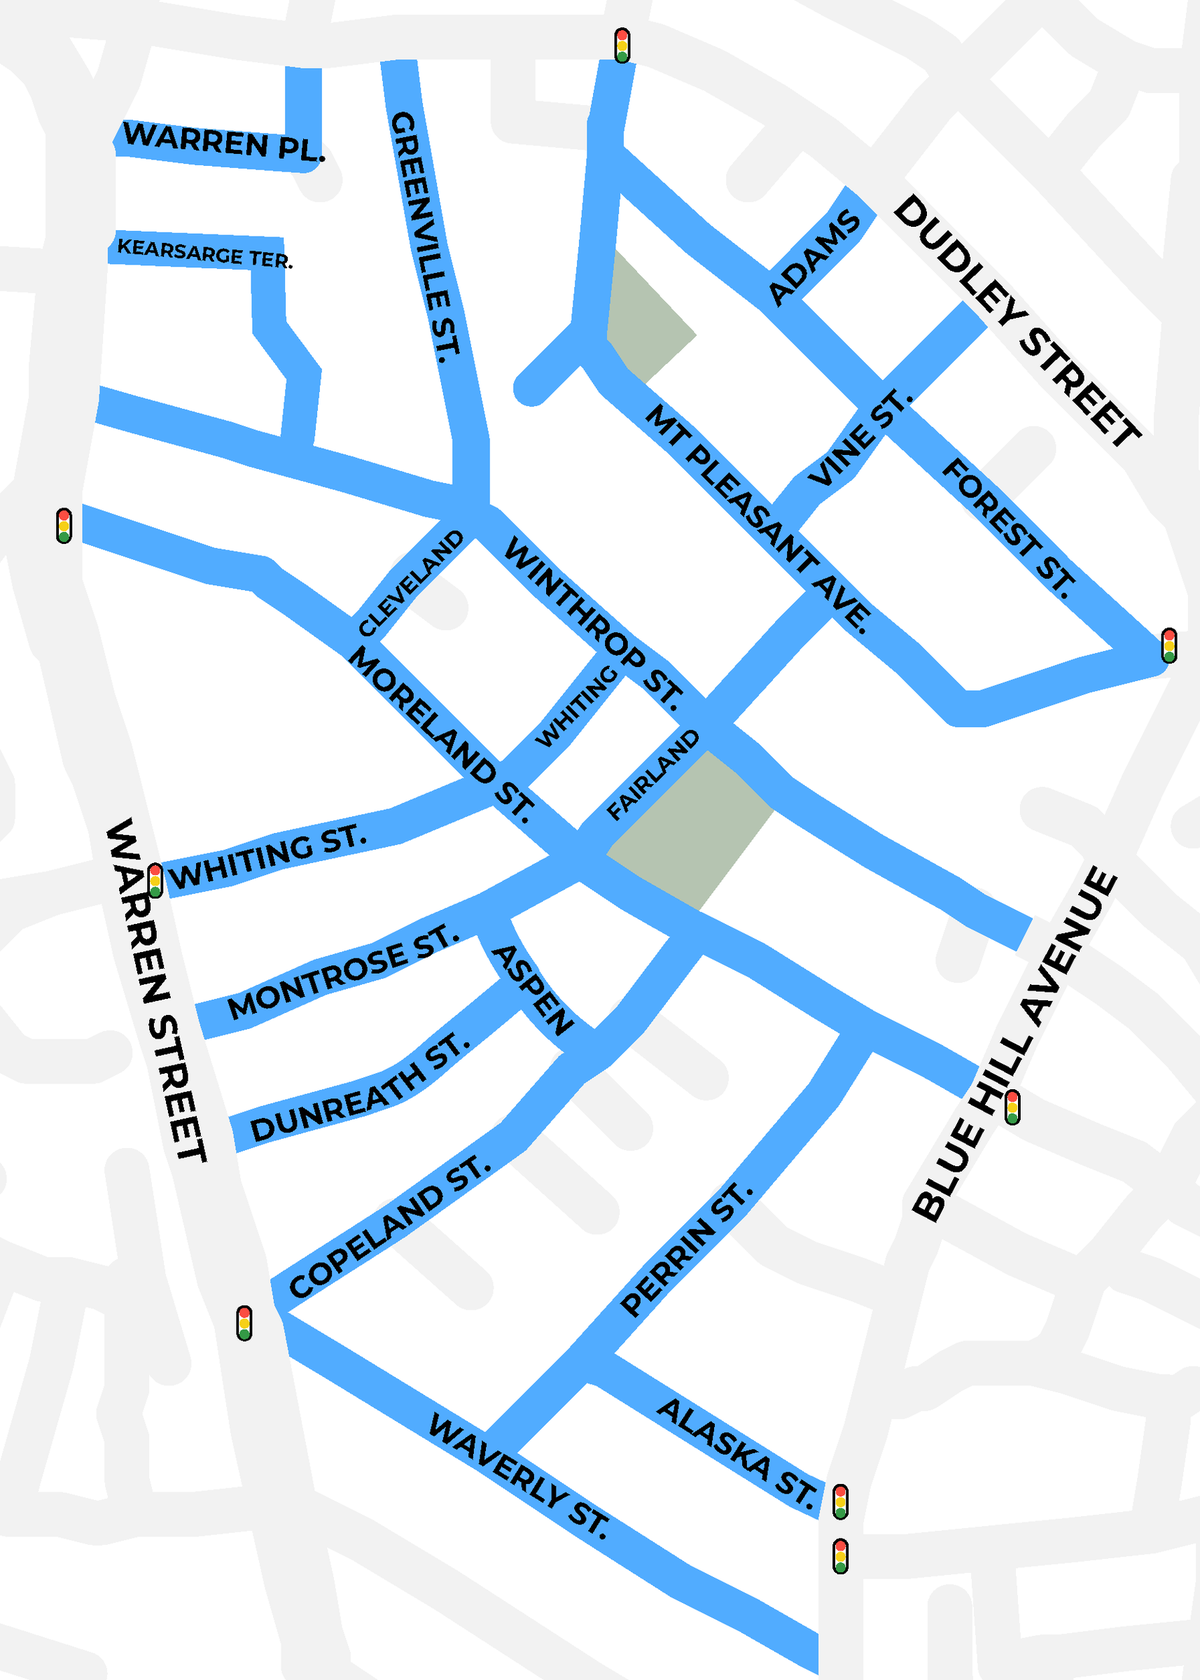 Map of Moreland Neighborhood Slow Streets zone  with streets included in the project shown in blue